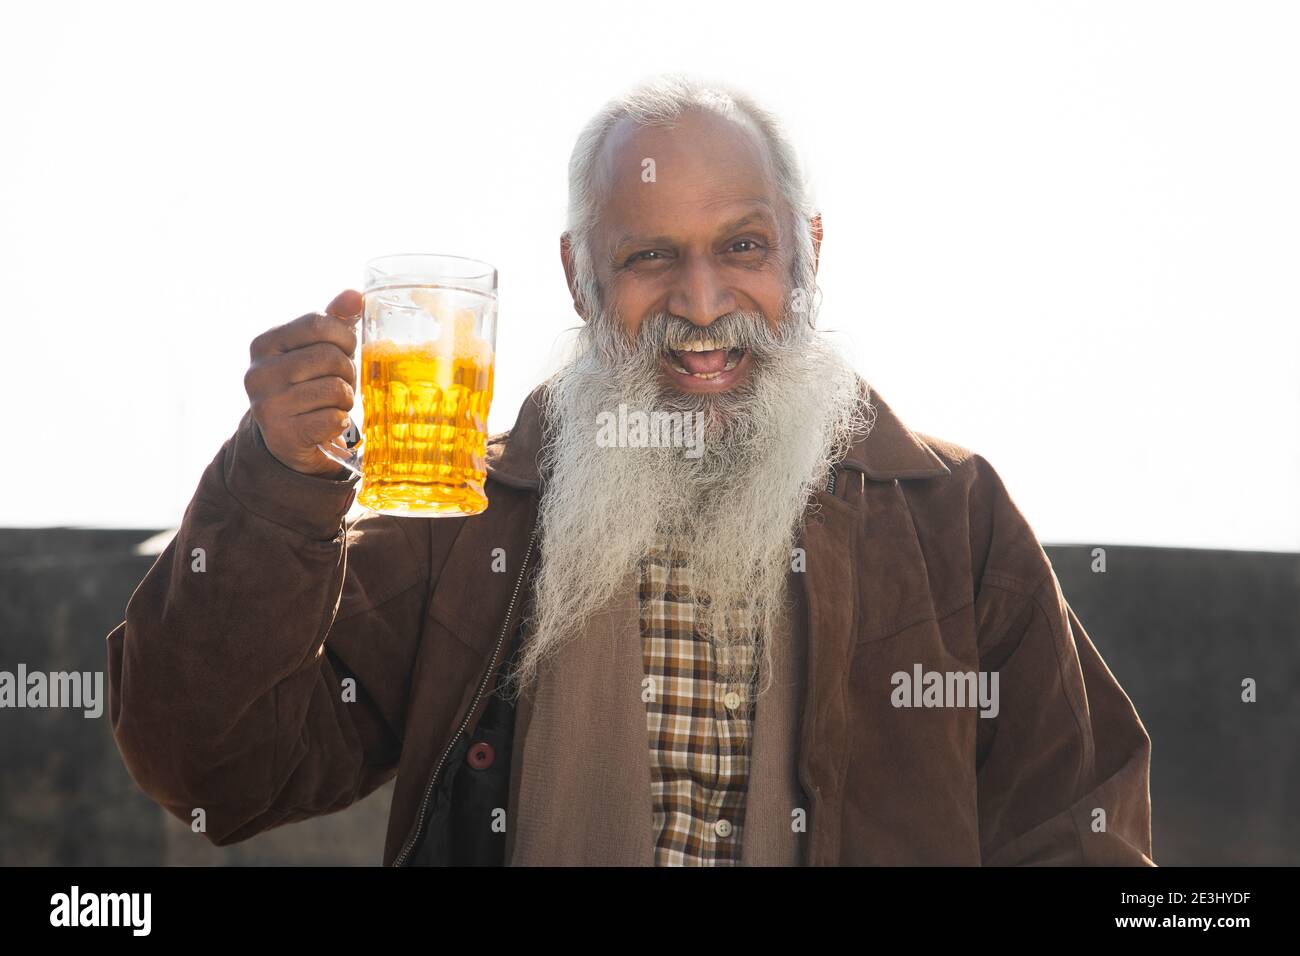 A CHEERFUL OLD MAN HAPPILY HOLDING GLASS OF BEER Stock Photo